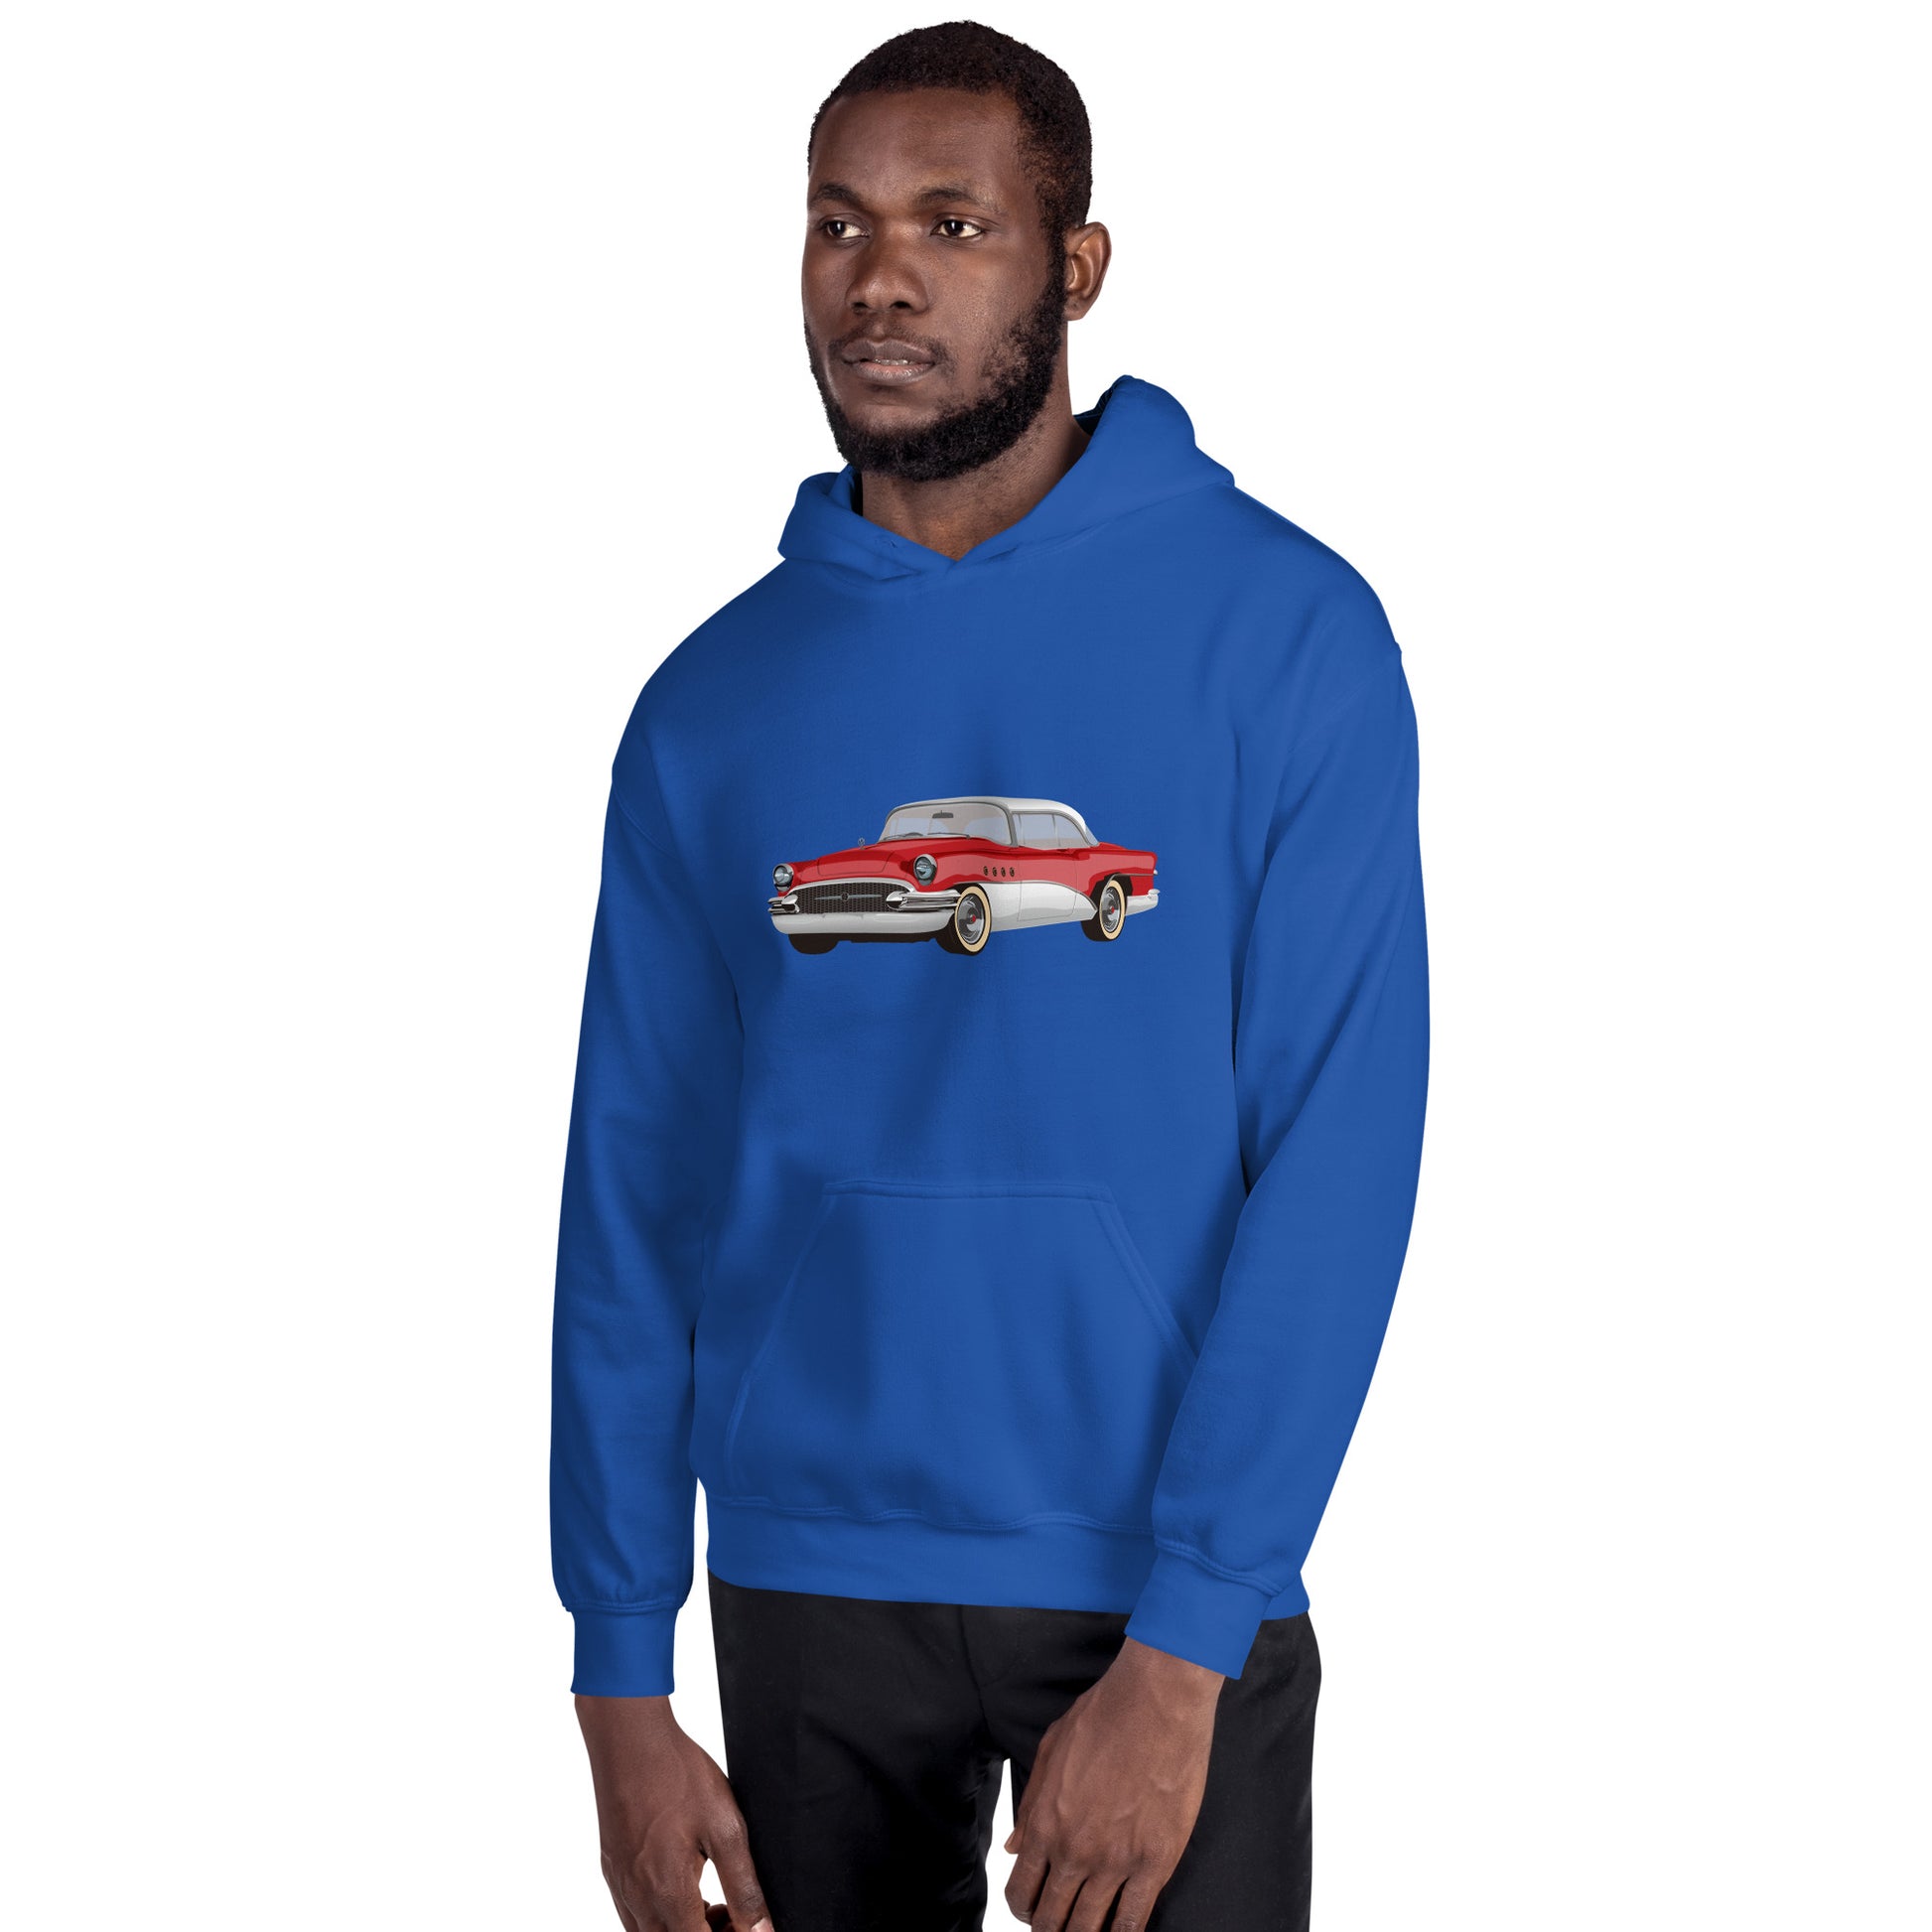 Man with royal blue hoodie with red chevrolet